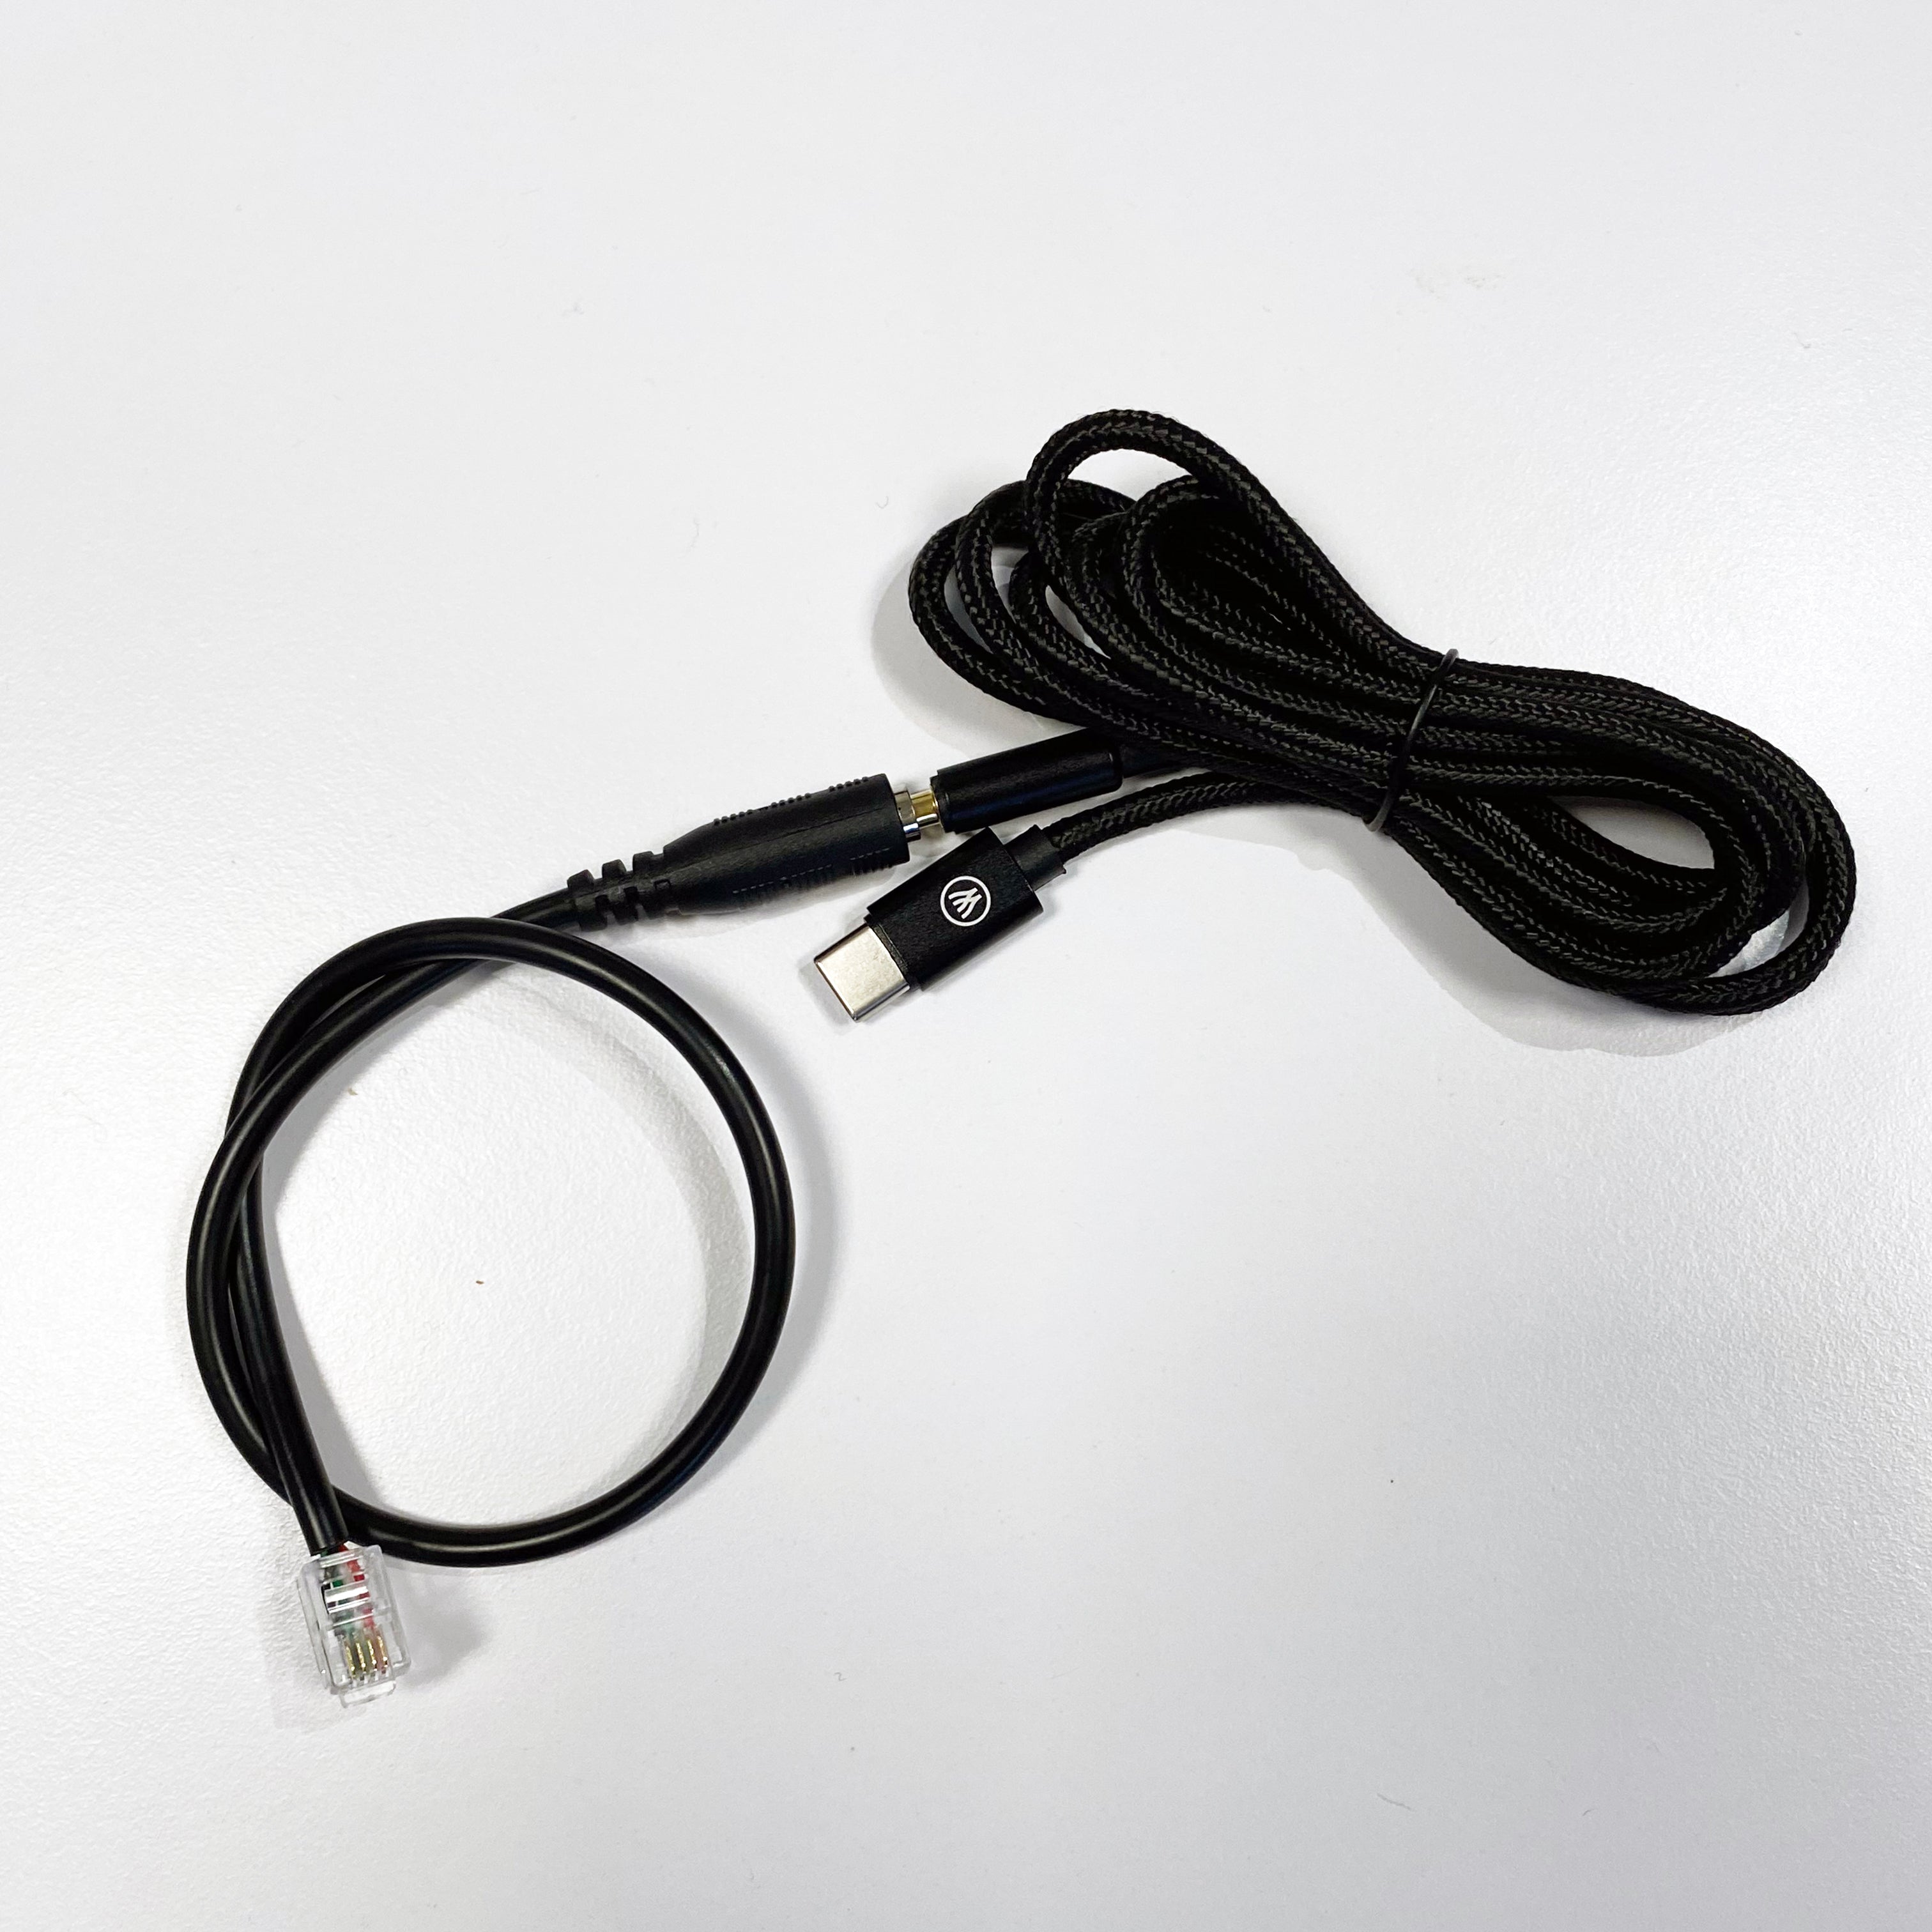 Orosound Aux to RJ9 and USB to RJ9 Cable Kit